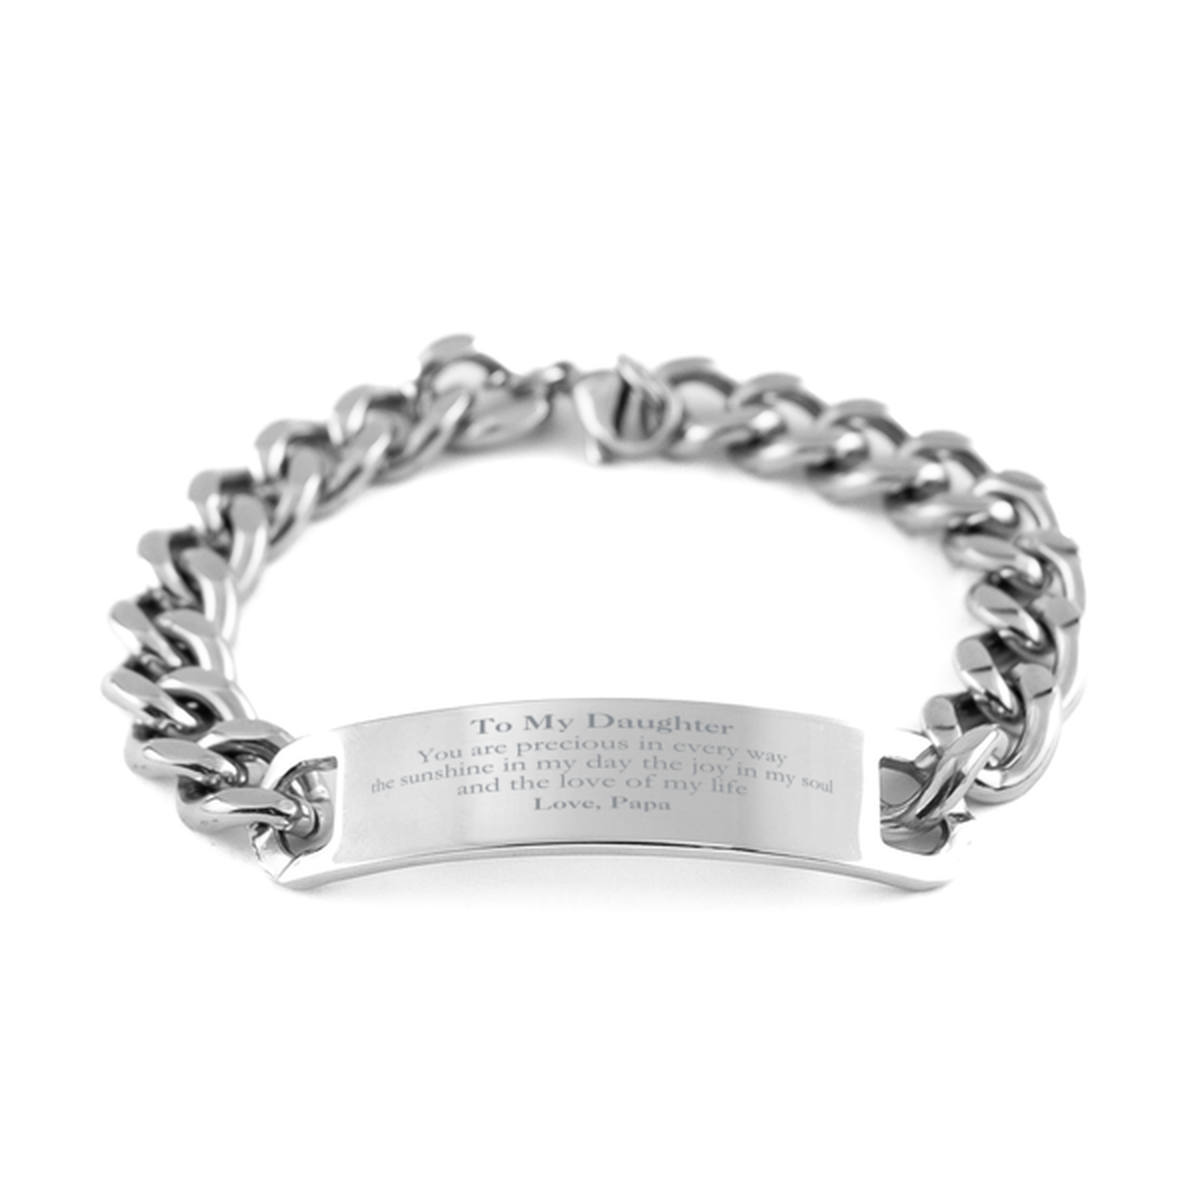 Graduation Gifts for Daughter Cuban Chain Stainless Steel Bracelet Present from Papa, Christmas Daughter Birthday Gifts Daughter You are precious in every way the sunshine in my day. Love, Papa